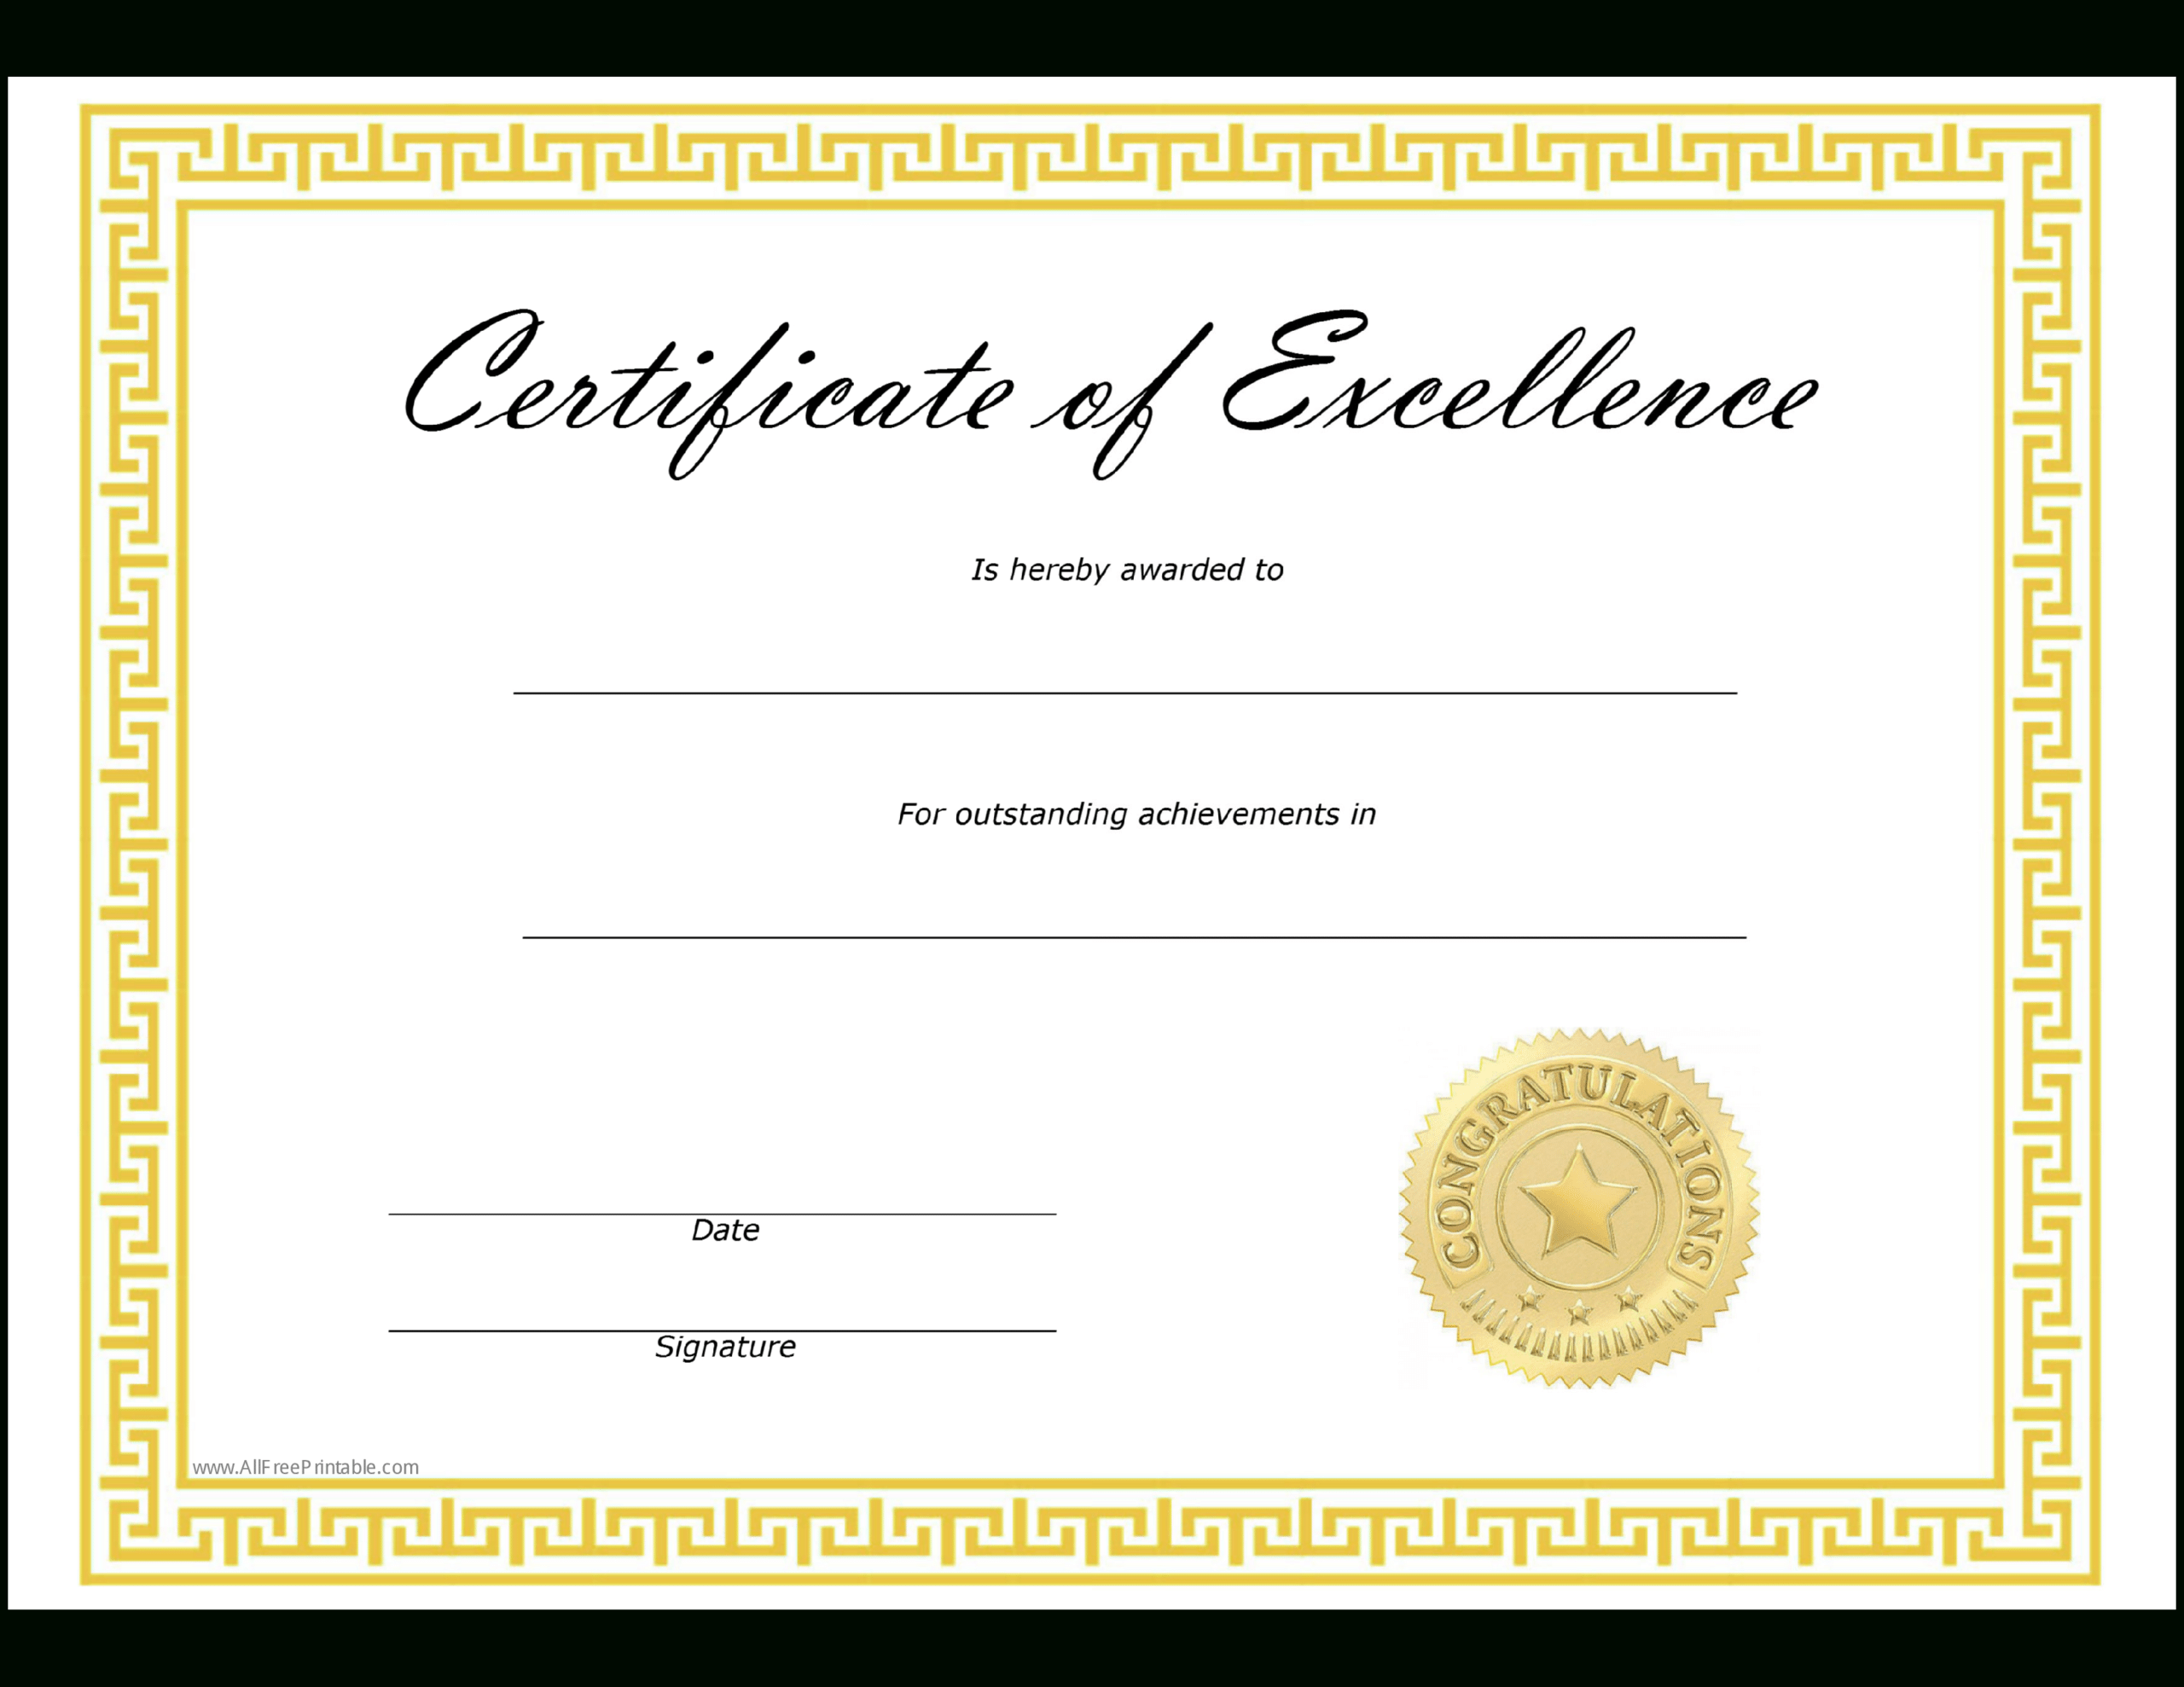 Excellence Award Template - Zohre.horizonconsulting.co For Free Certificate Of Excellence Template